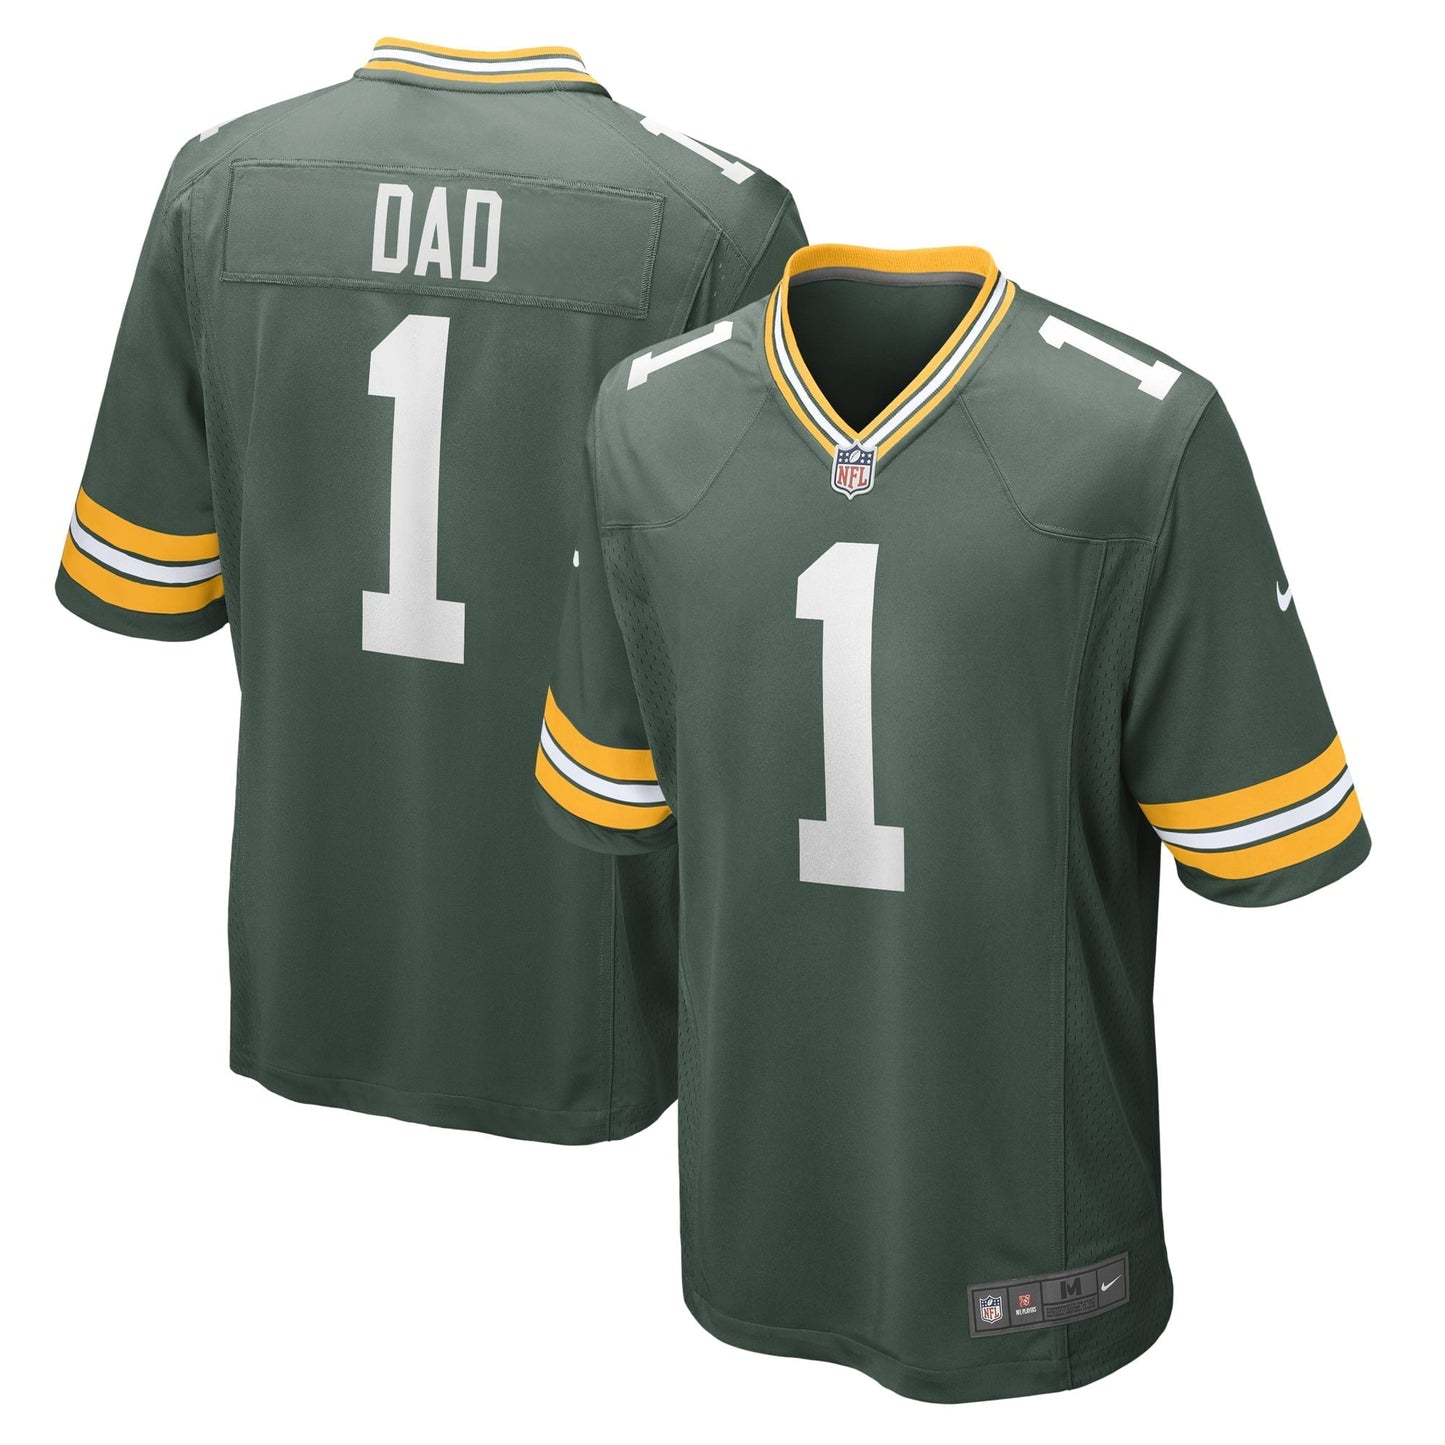 Men's Nike Number 1 Dad Green Green Bay Packers Game Jersey